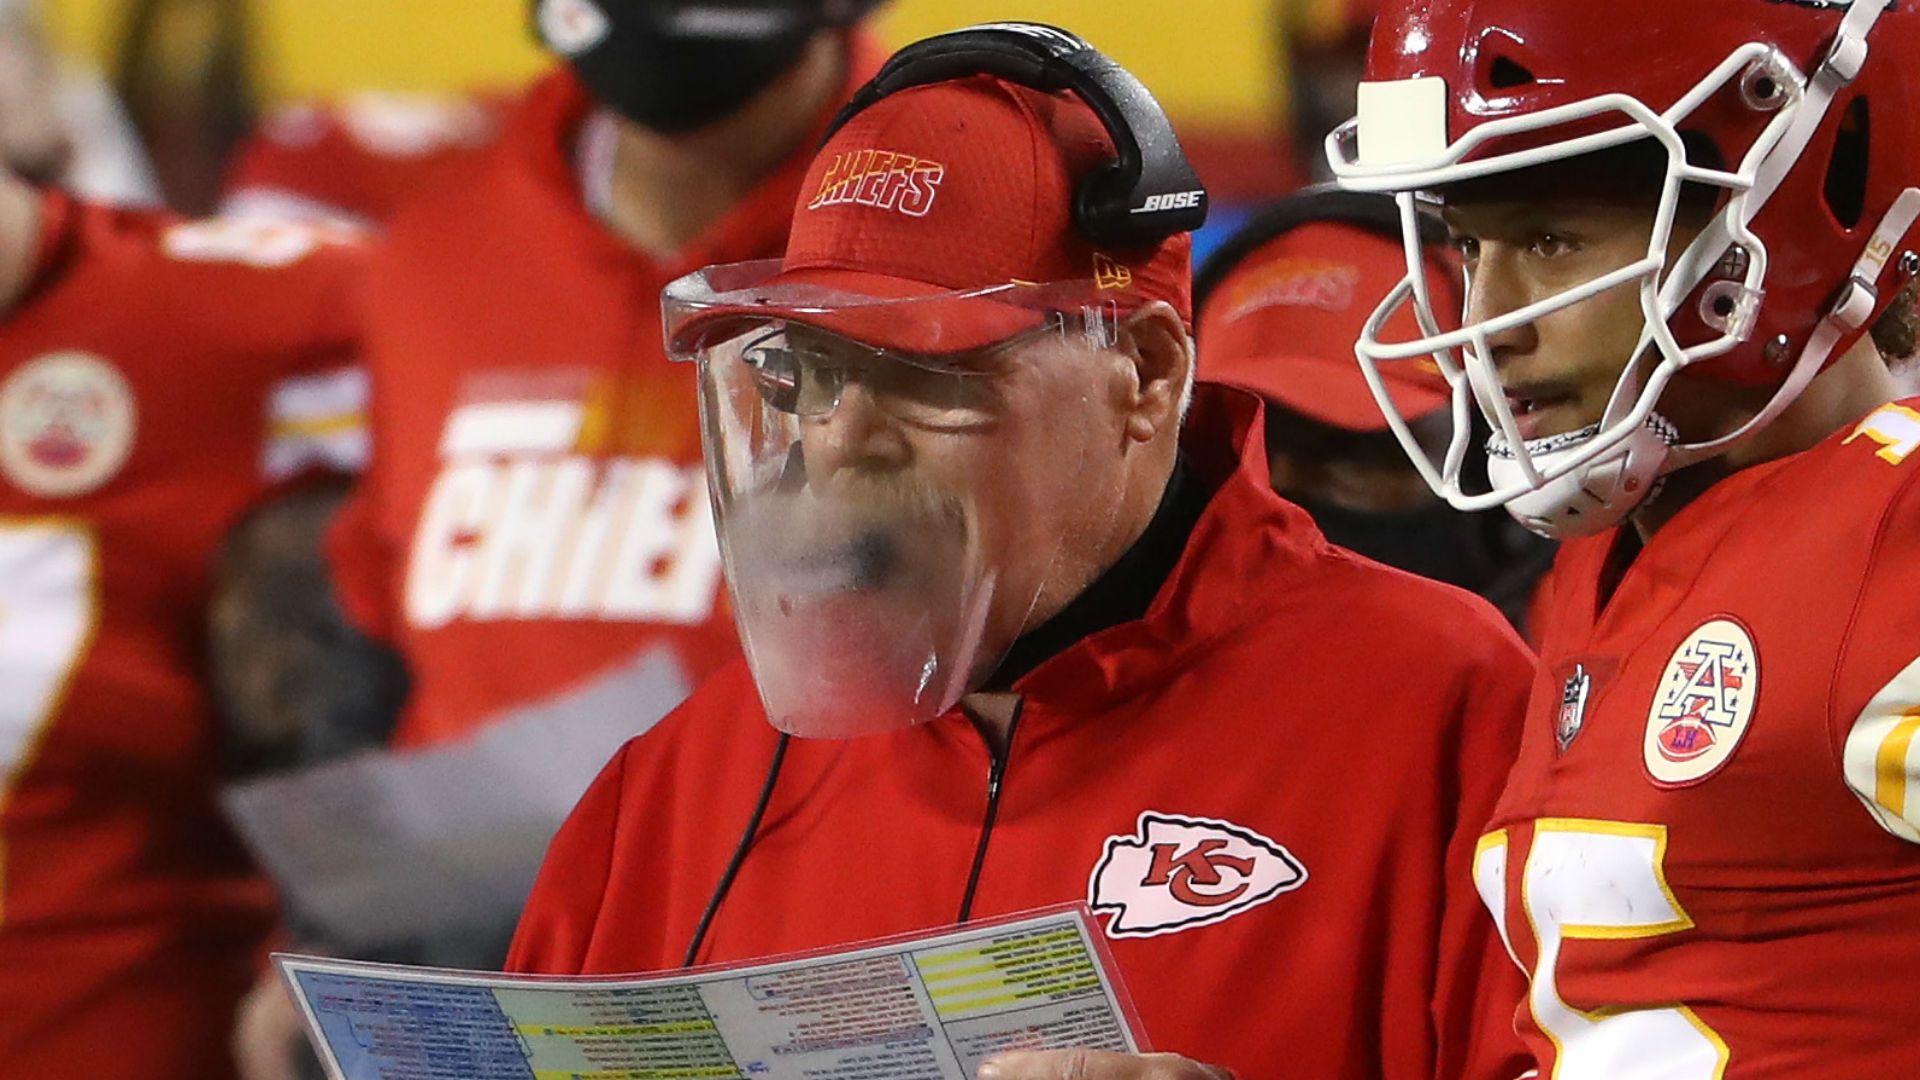 Andy Reid's foggy face shield steals the show on NFL opening night; Twitter reacts accordingly